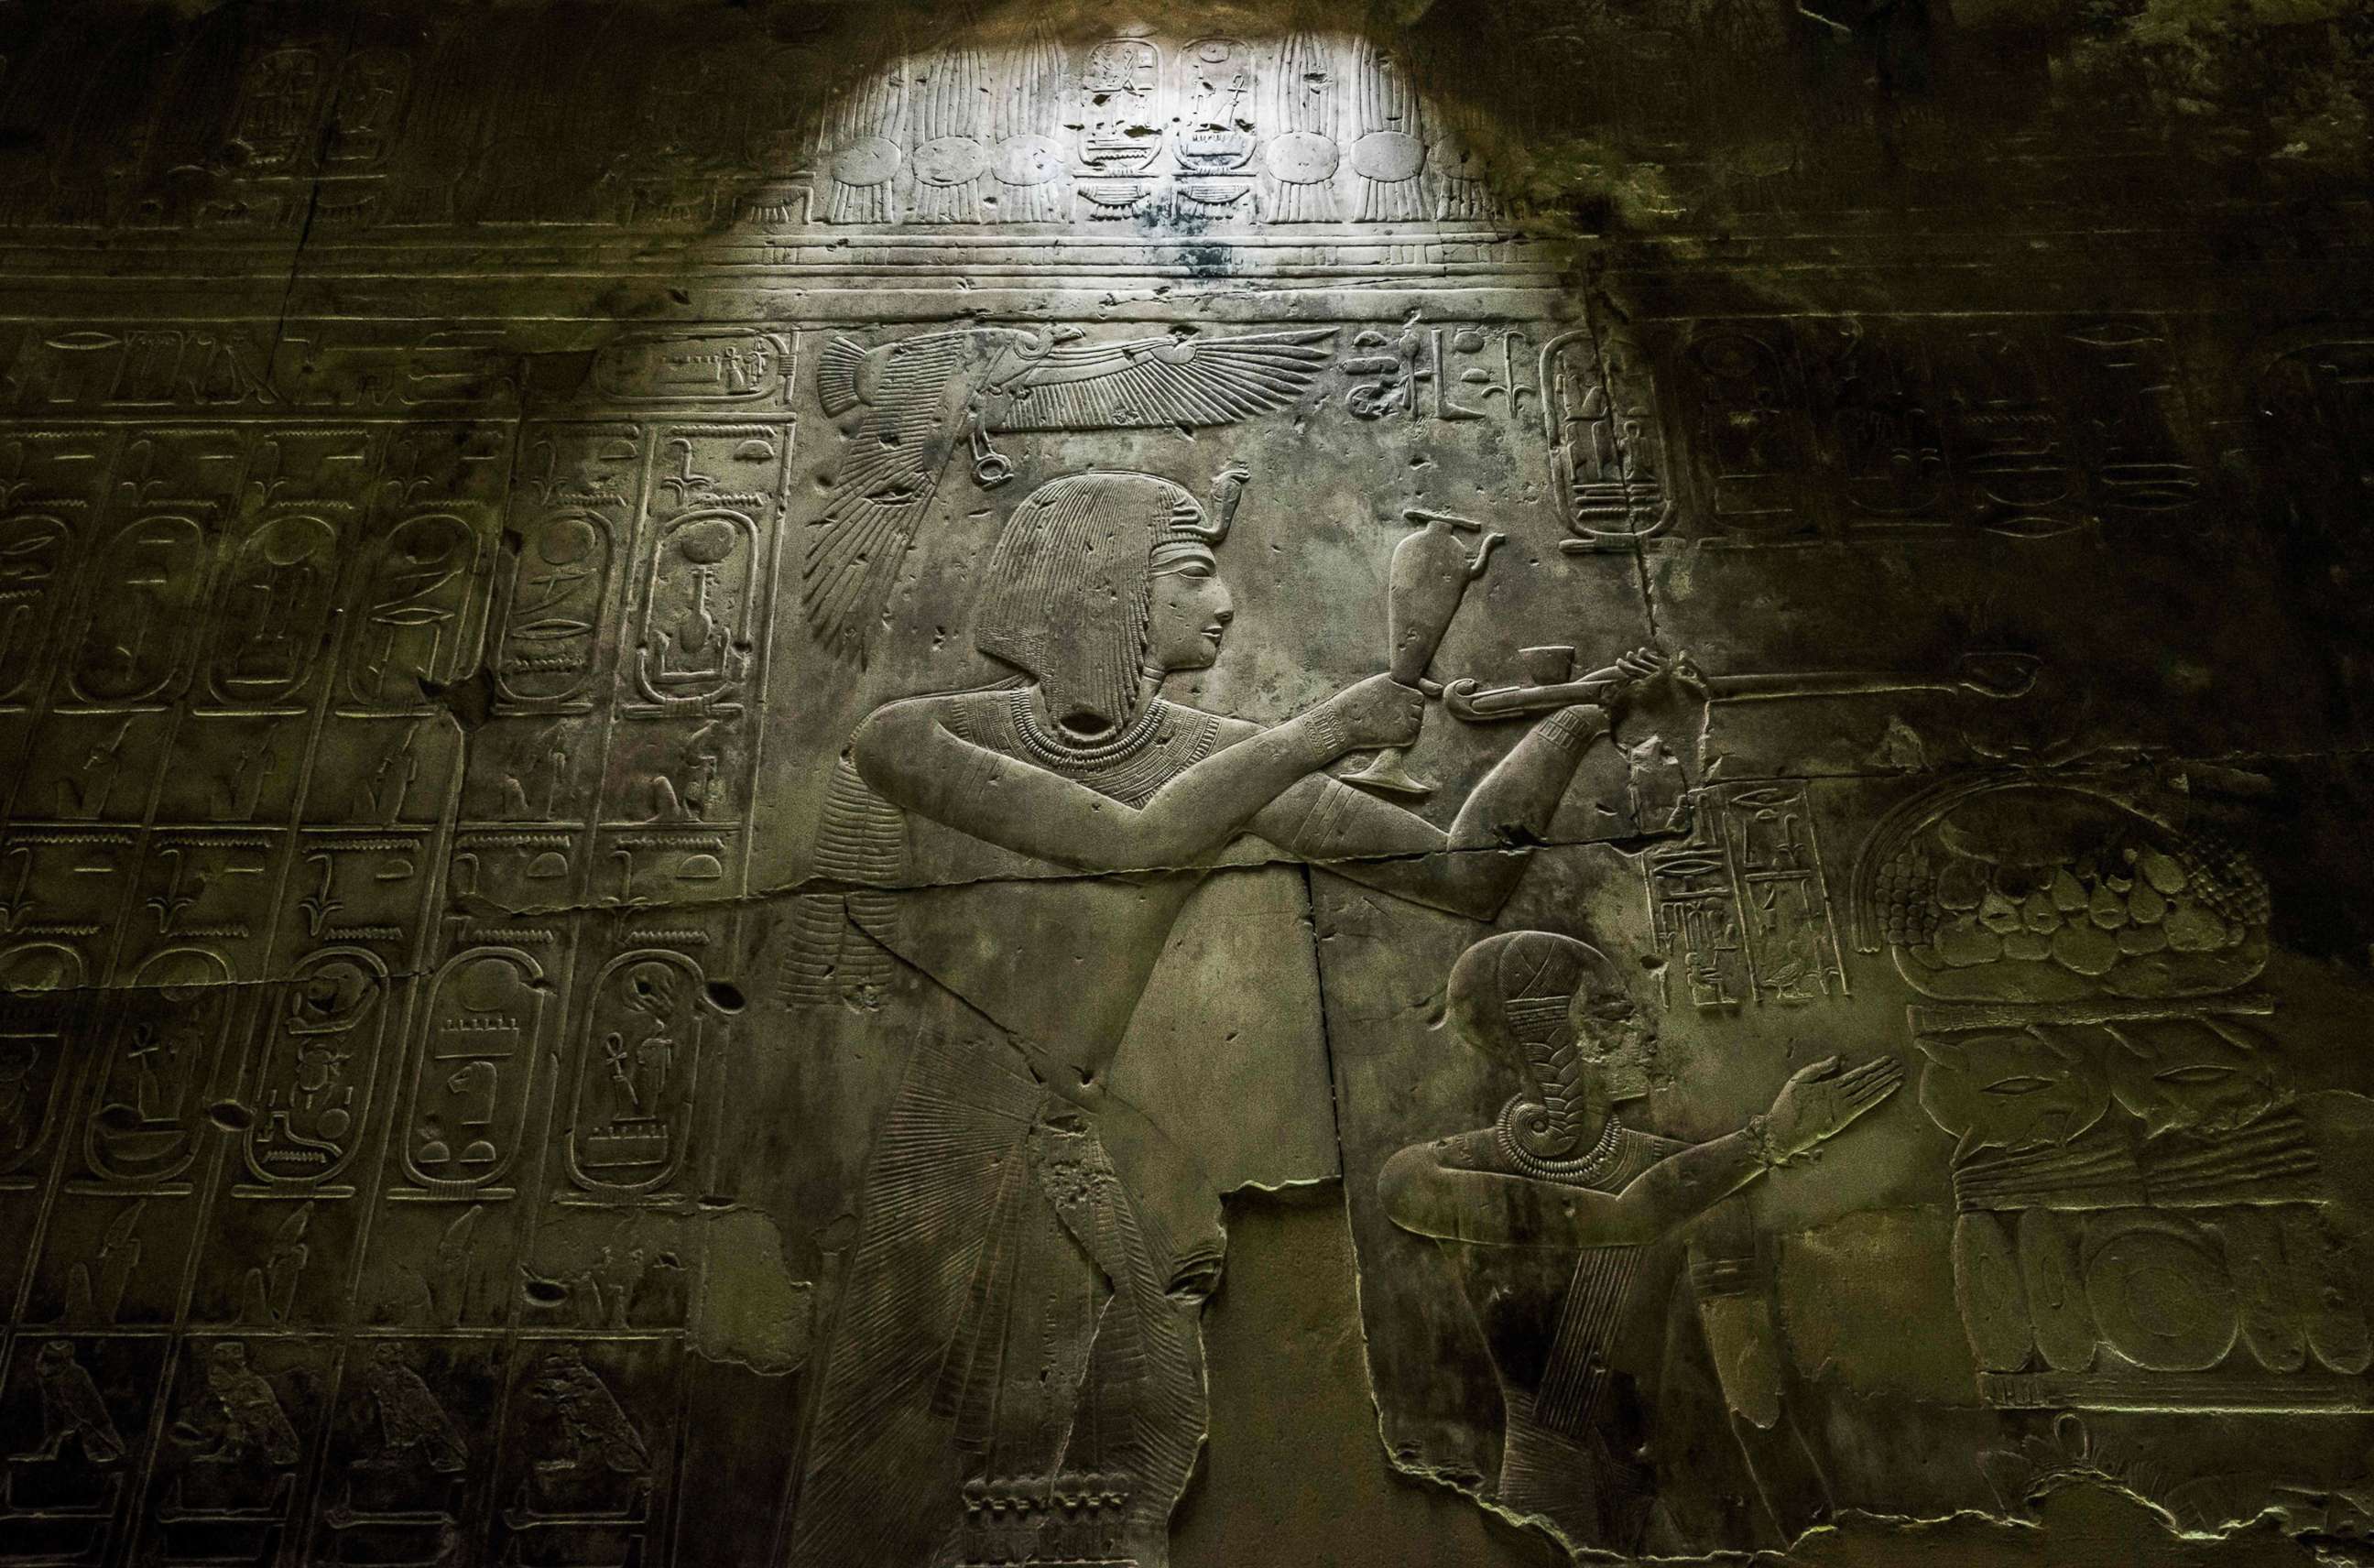 PHOTO: This picture taken on April 5, 2019 shows a view of hieroglyphic inscriptions and relief on a wall of the the New Kingdom period (16th-11th centuries BC) Temple of Seti I, at the archaeological site of Abydos near Egypt's southern city of Sohag.